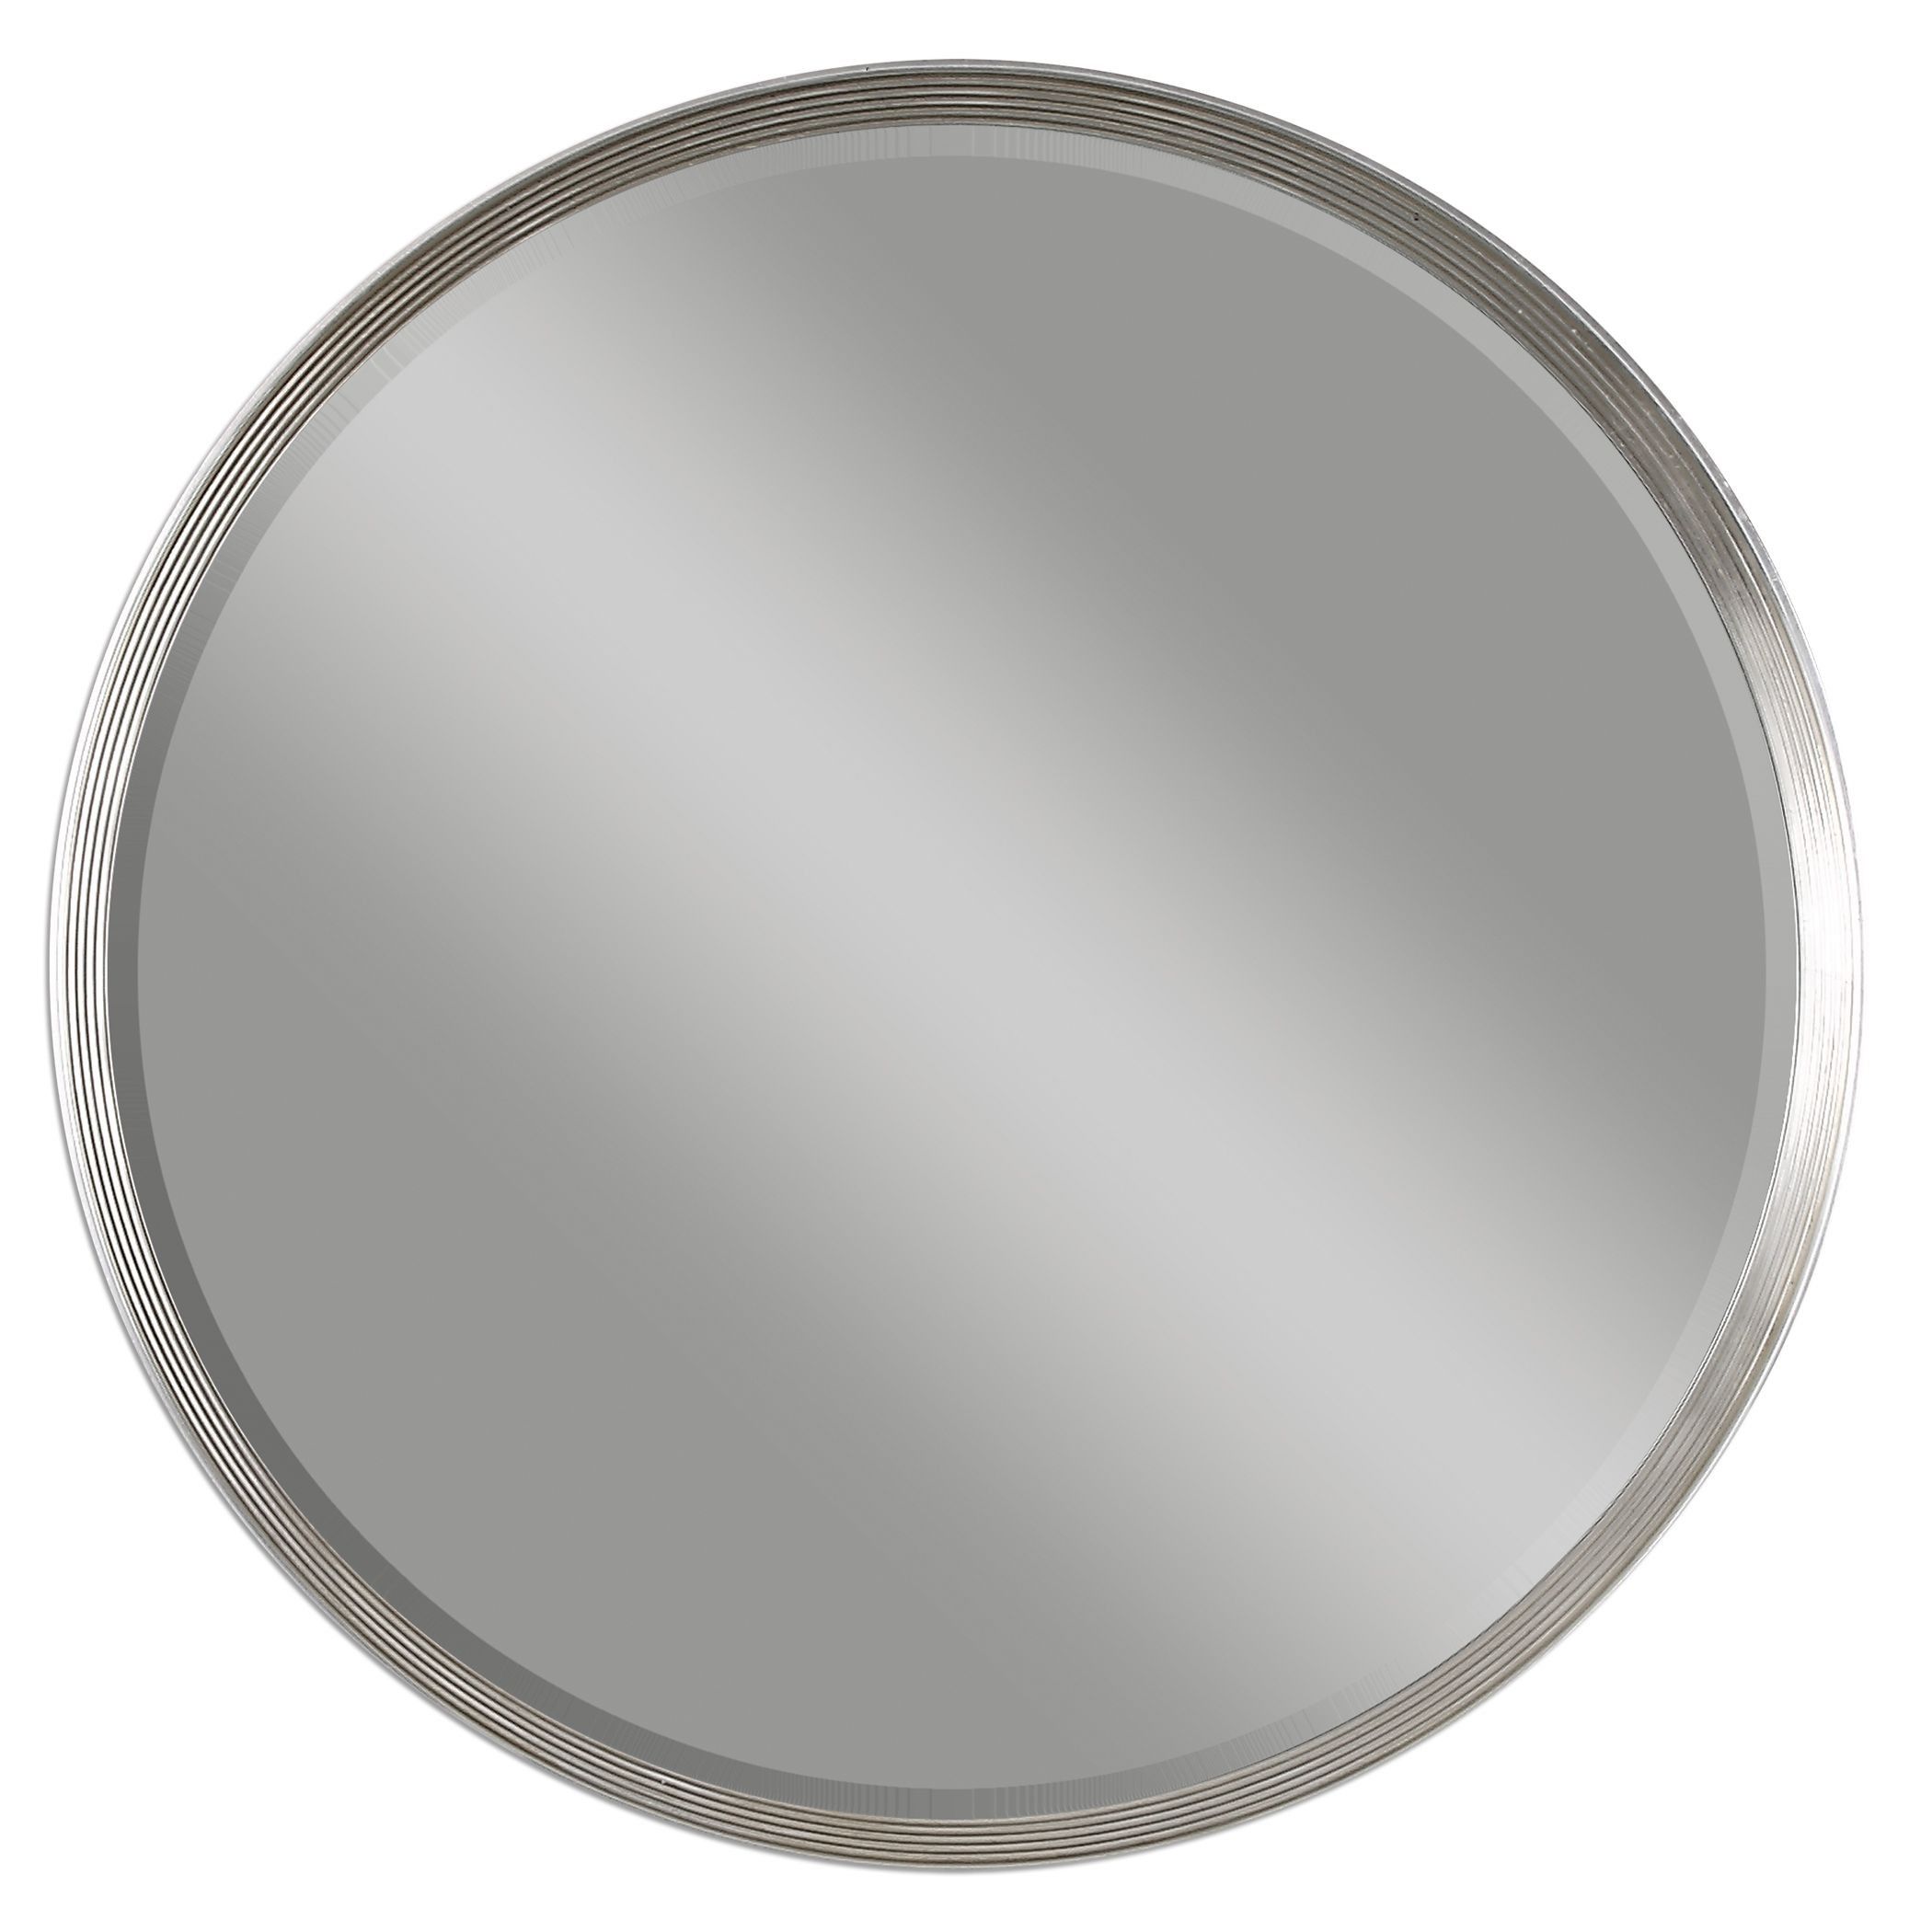 Serenza Round Silver Mirror From Uttermost (14547) | Coleman Furniture With Silver Leaf Round Wall Mirrors (View 12 of 15)